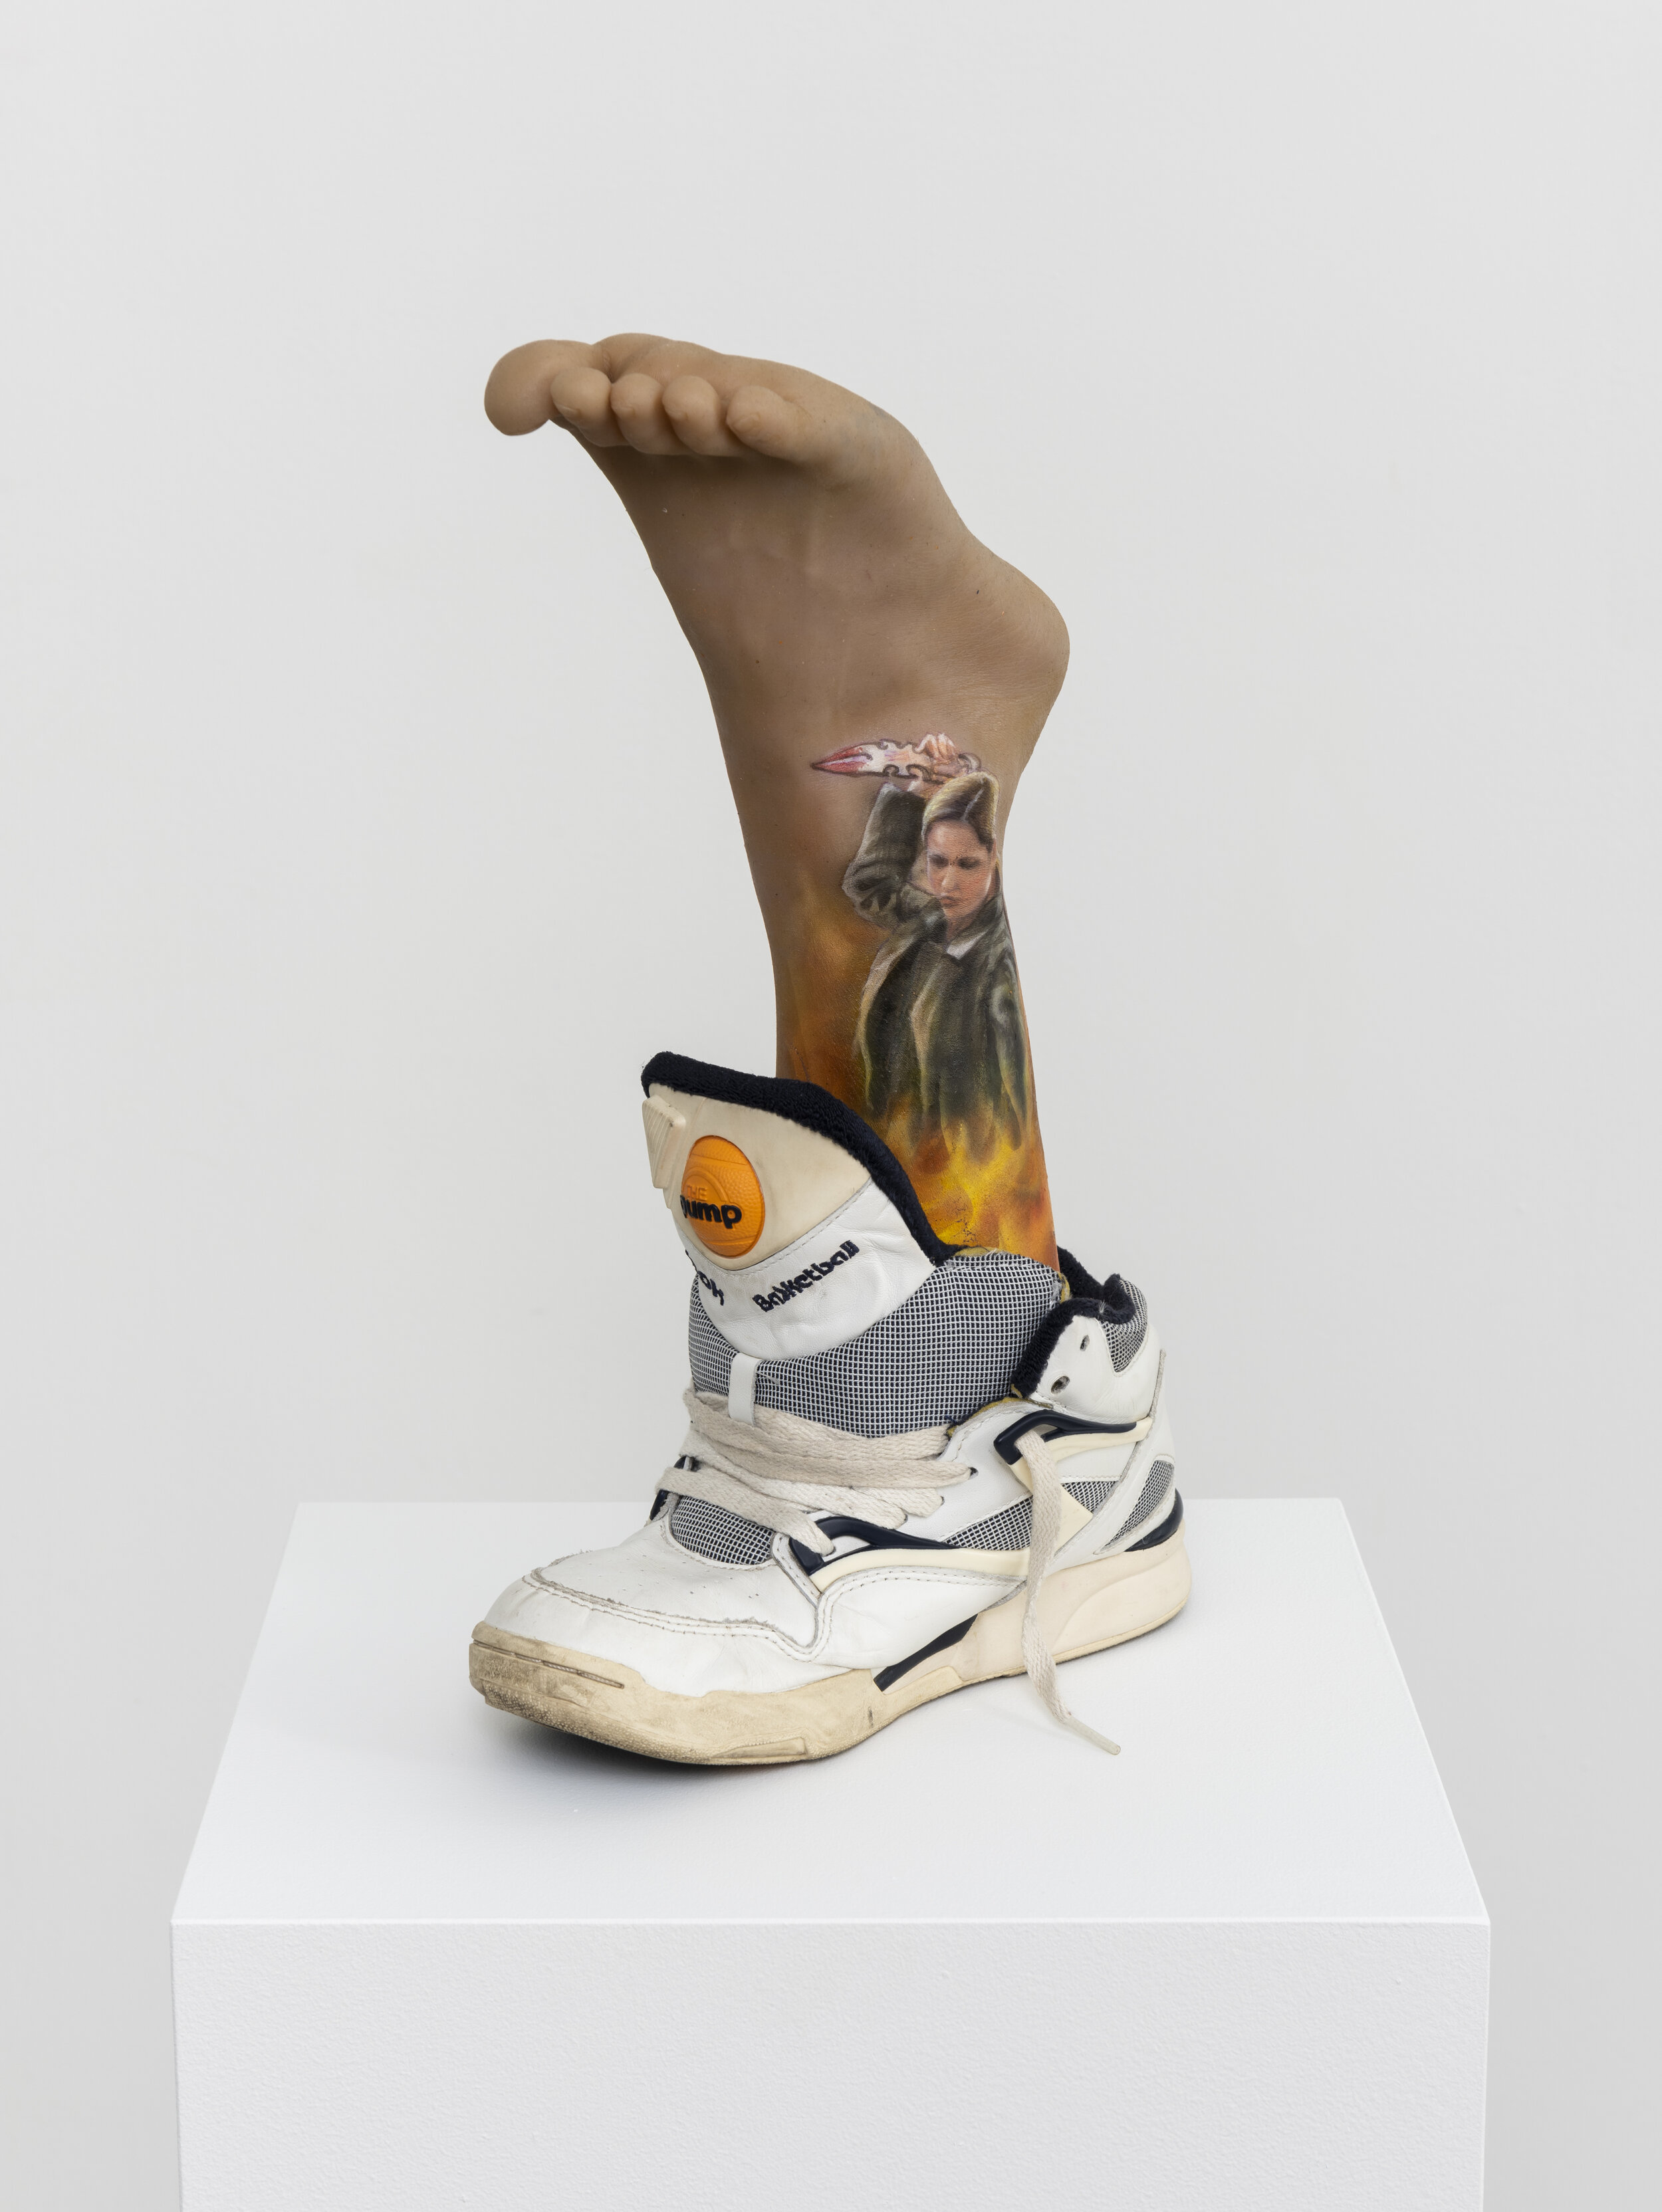   Cécile di Giovanni   The Slayer  2018 Silicone, airbrush and oil paint, sneaker 16 inches x 12 inches x 5 inches 